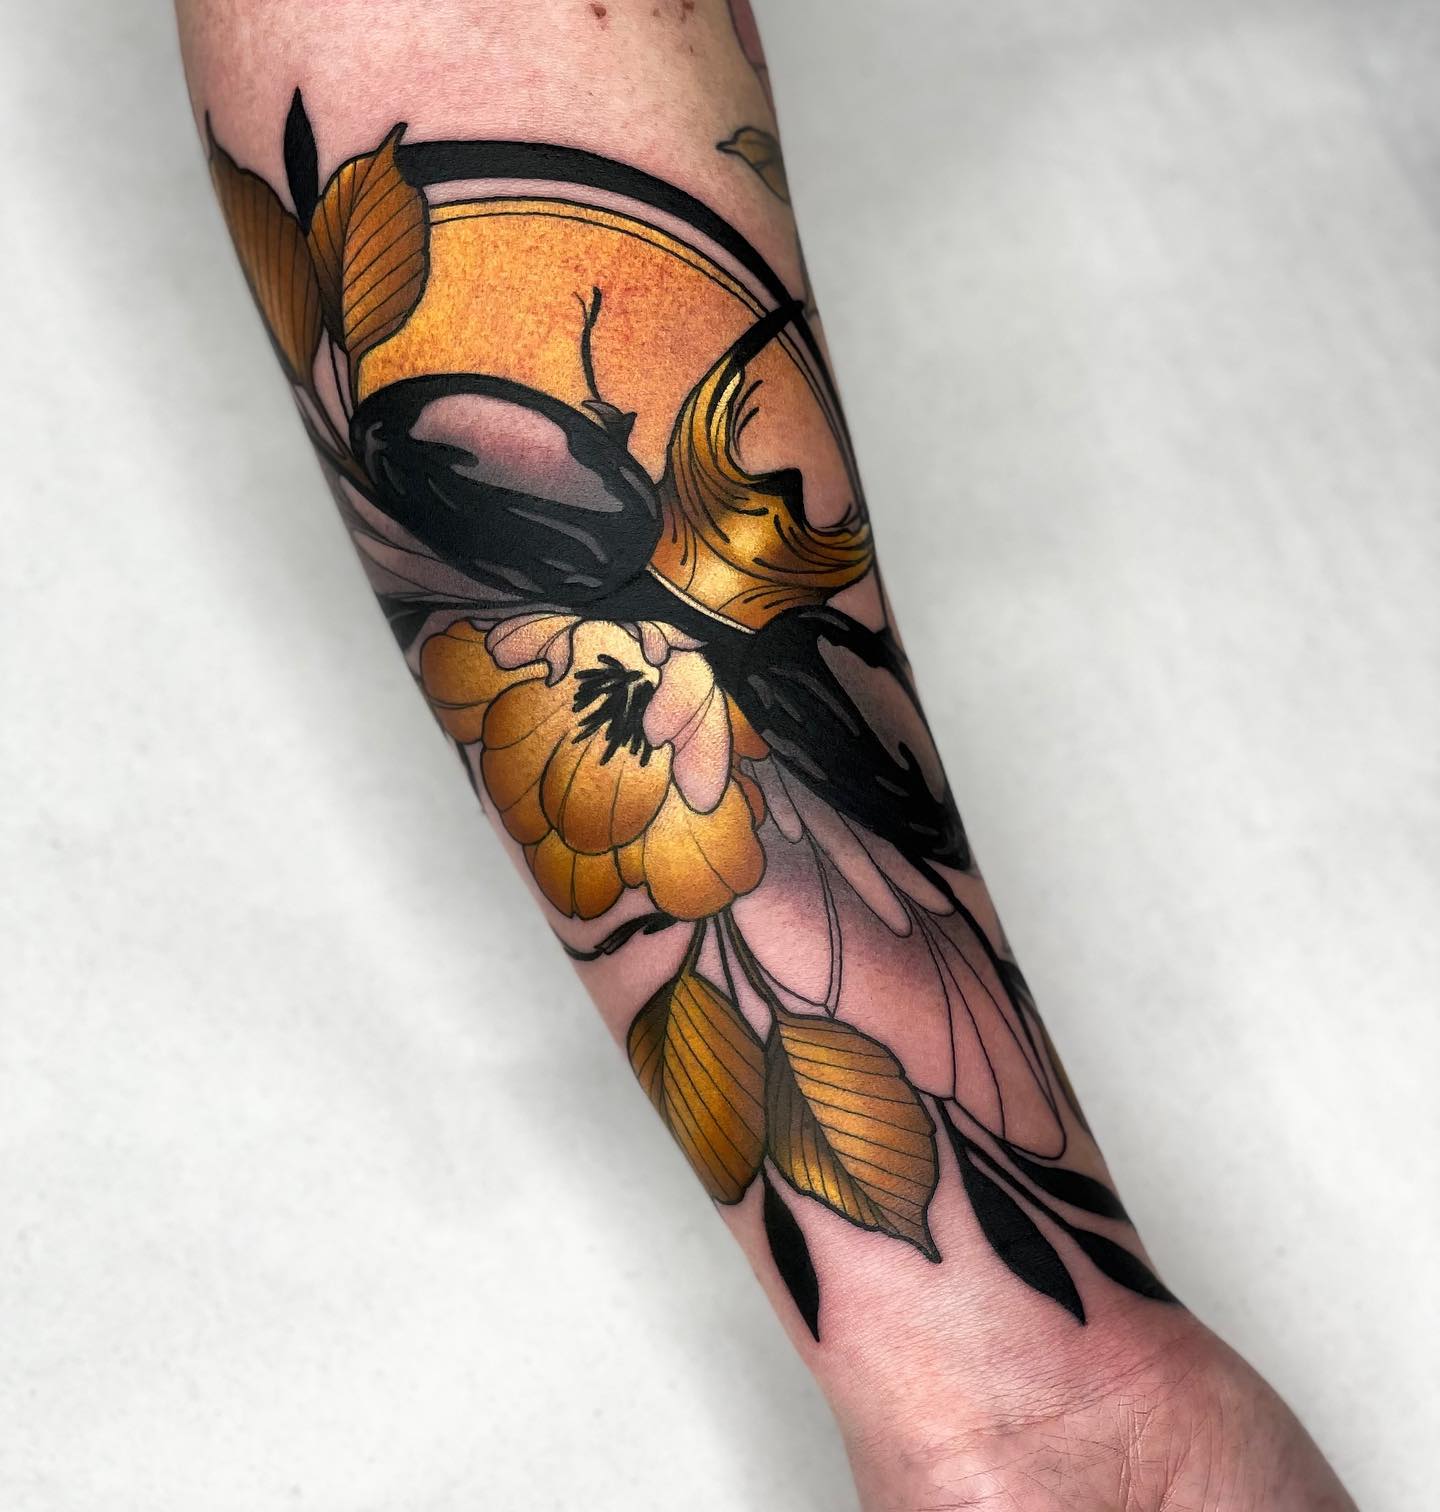 True Tattoo  Loving this inprogress bug themed sleeve from Matt Grosso  Wanna get started on your own sleeve Set up a consultation Give us a  call 8042338783 Or email us your